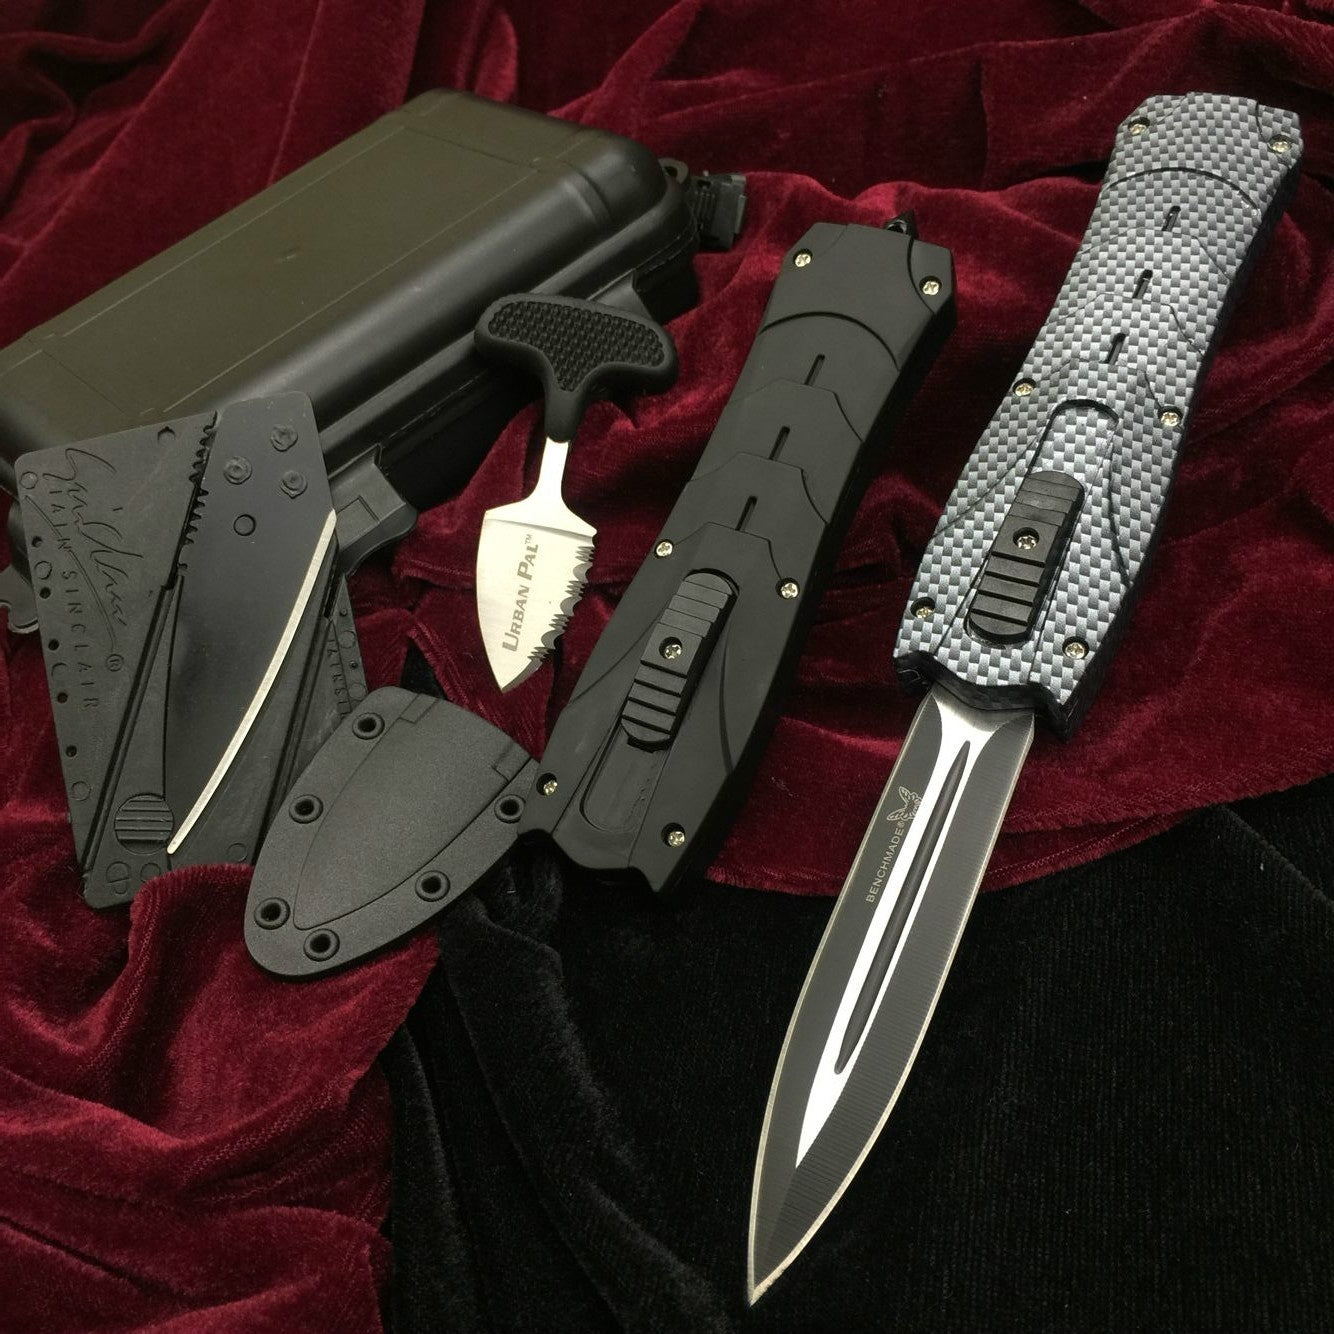 New Product Upgrades Pocket Tactical Knives Spring Assist Knife Folding Blade Fixed Blades Survival Rescue Tools Outdoor Camping Knifes Hunting Combat Automatic Open/Closes 8.8 Inch |Card Knife+Push Knife + Gifts Knives Set